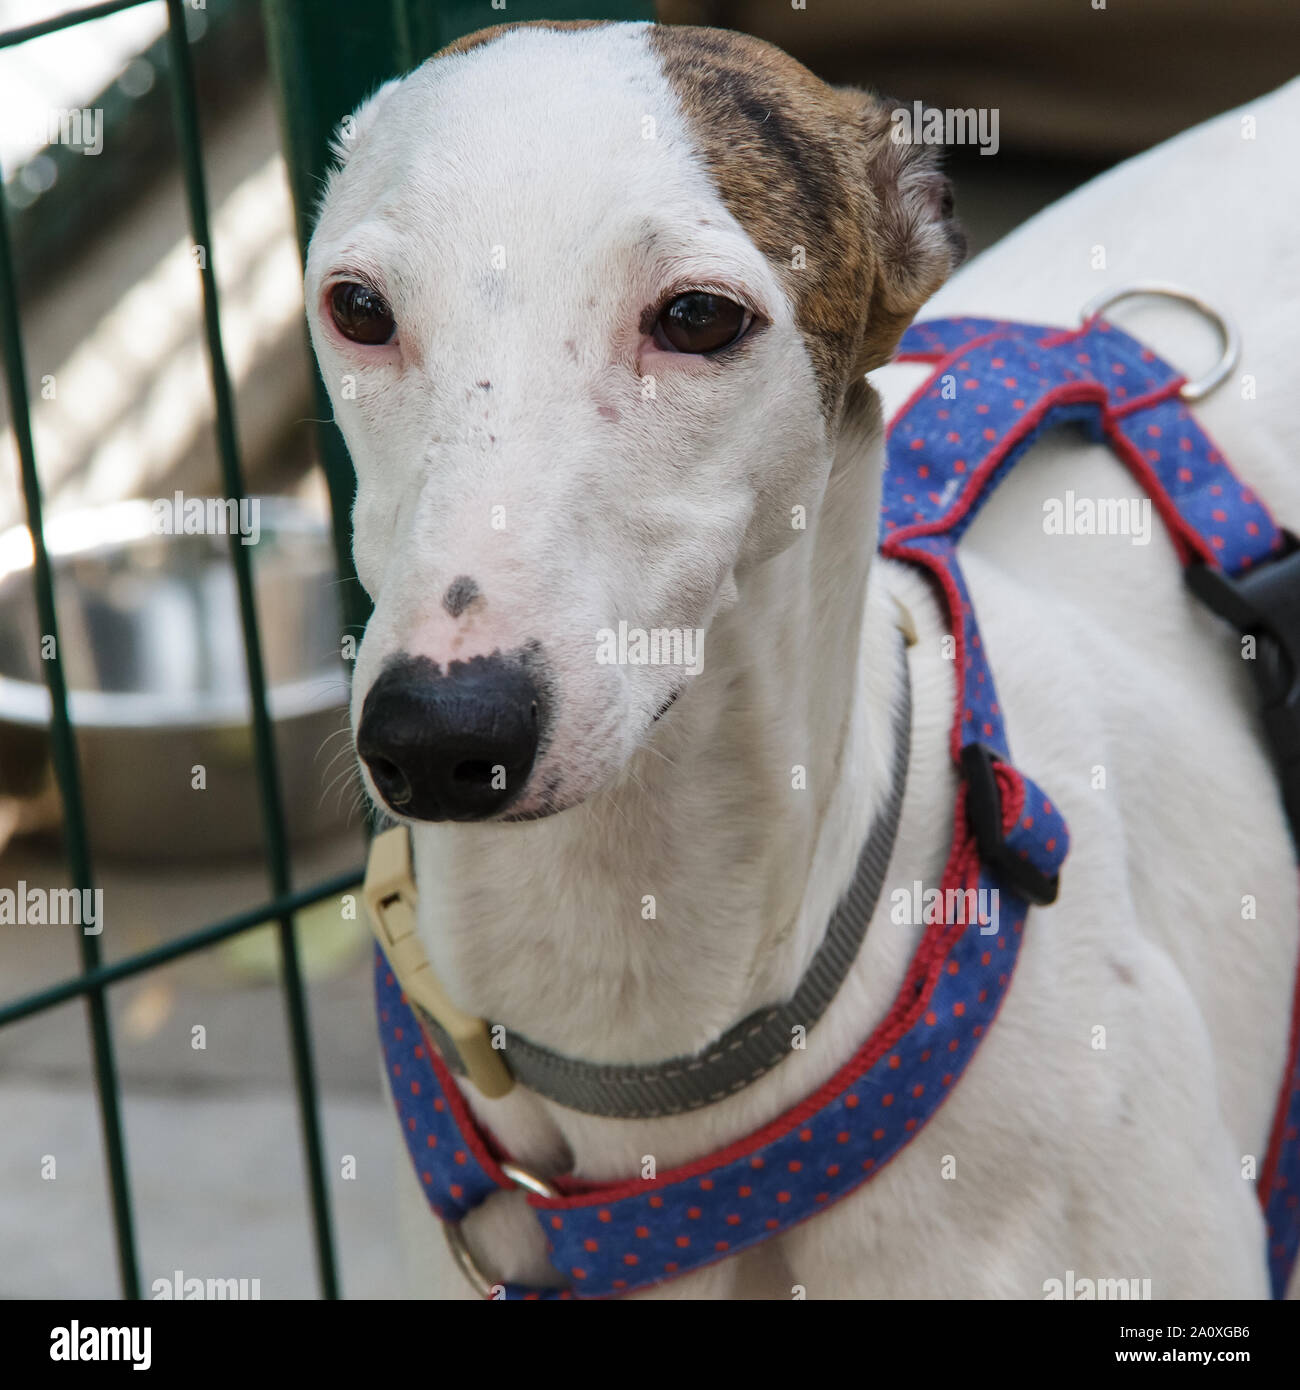 Hortaya Greyhound. Horty greyhounds are sporting and hunting dogs, rare in Russia and practically unknown outside its borders. Stock Photo